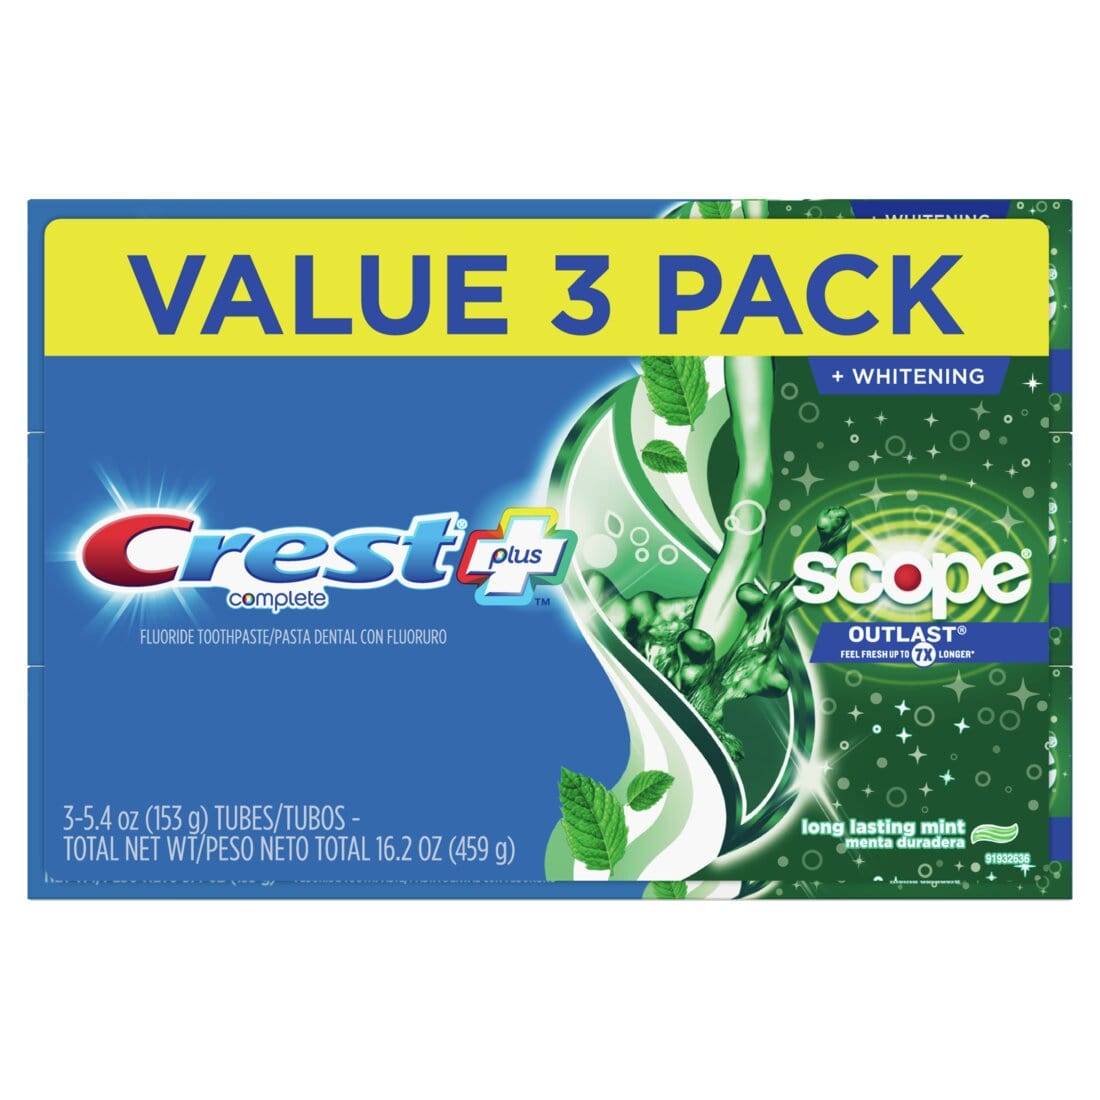 Crest + Scope Outlast Complete Whitening Toothpaste Mint Fresh Pack of 3 - 5.4oz/4pk